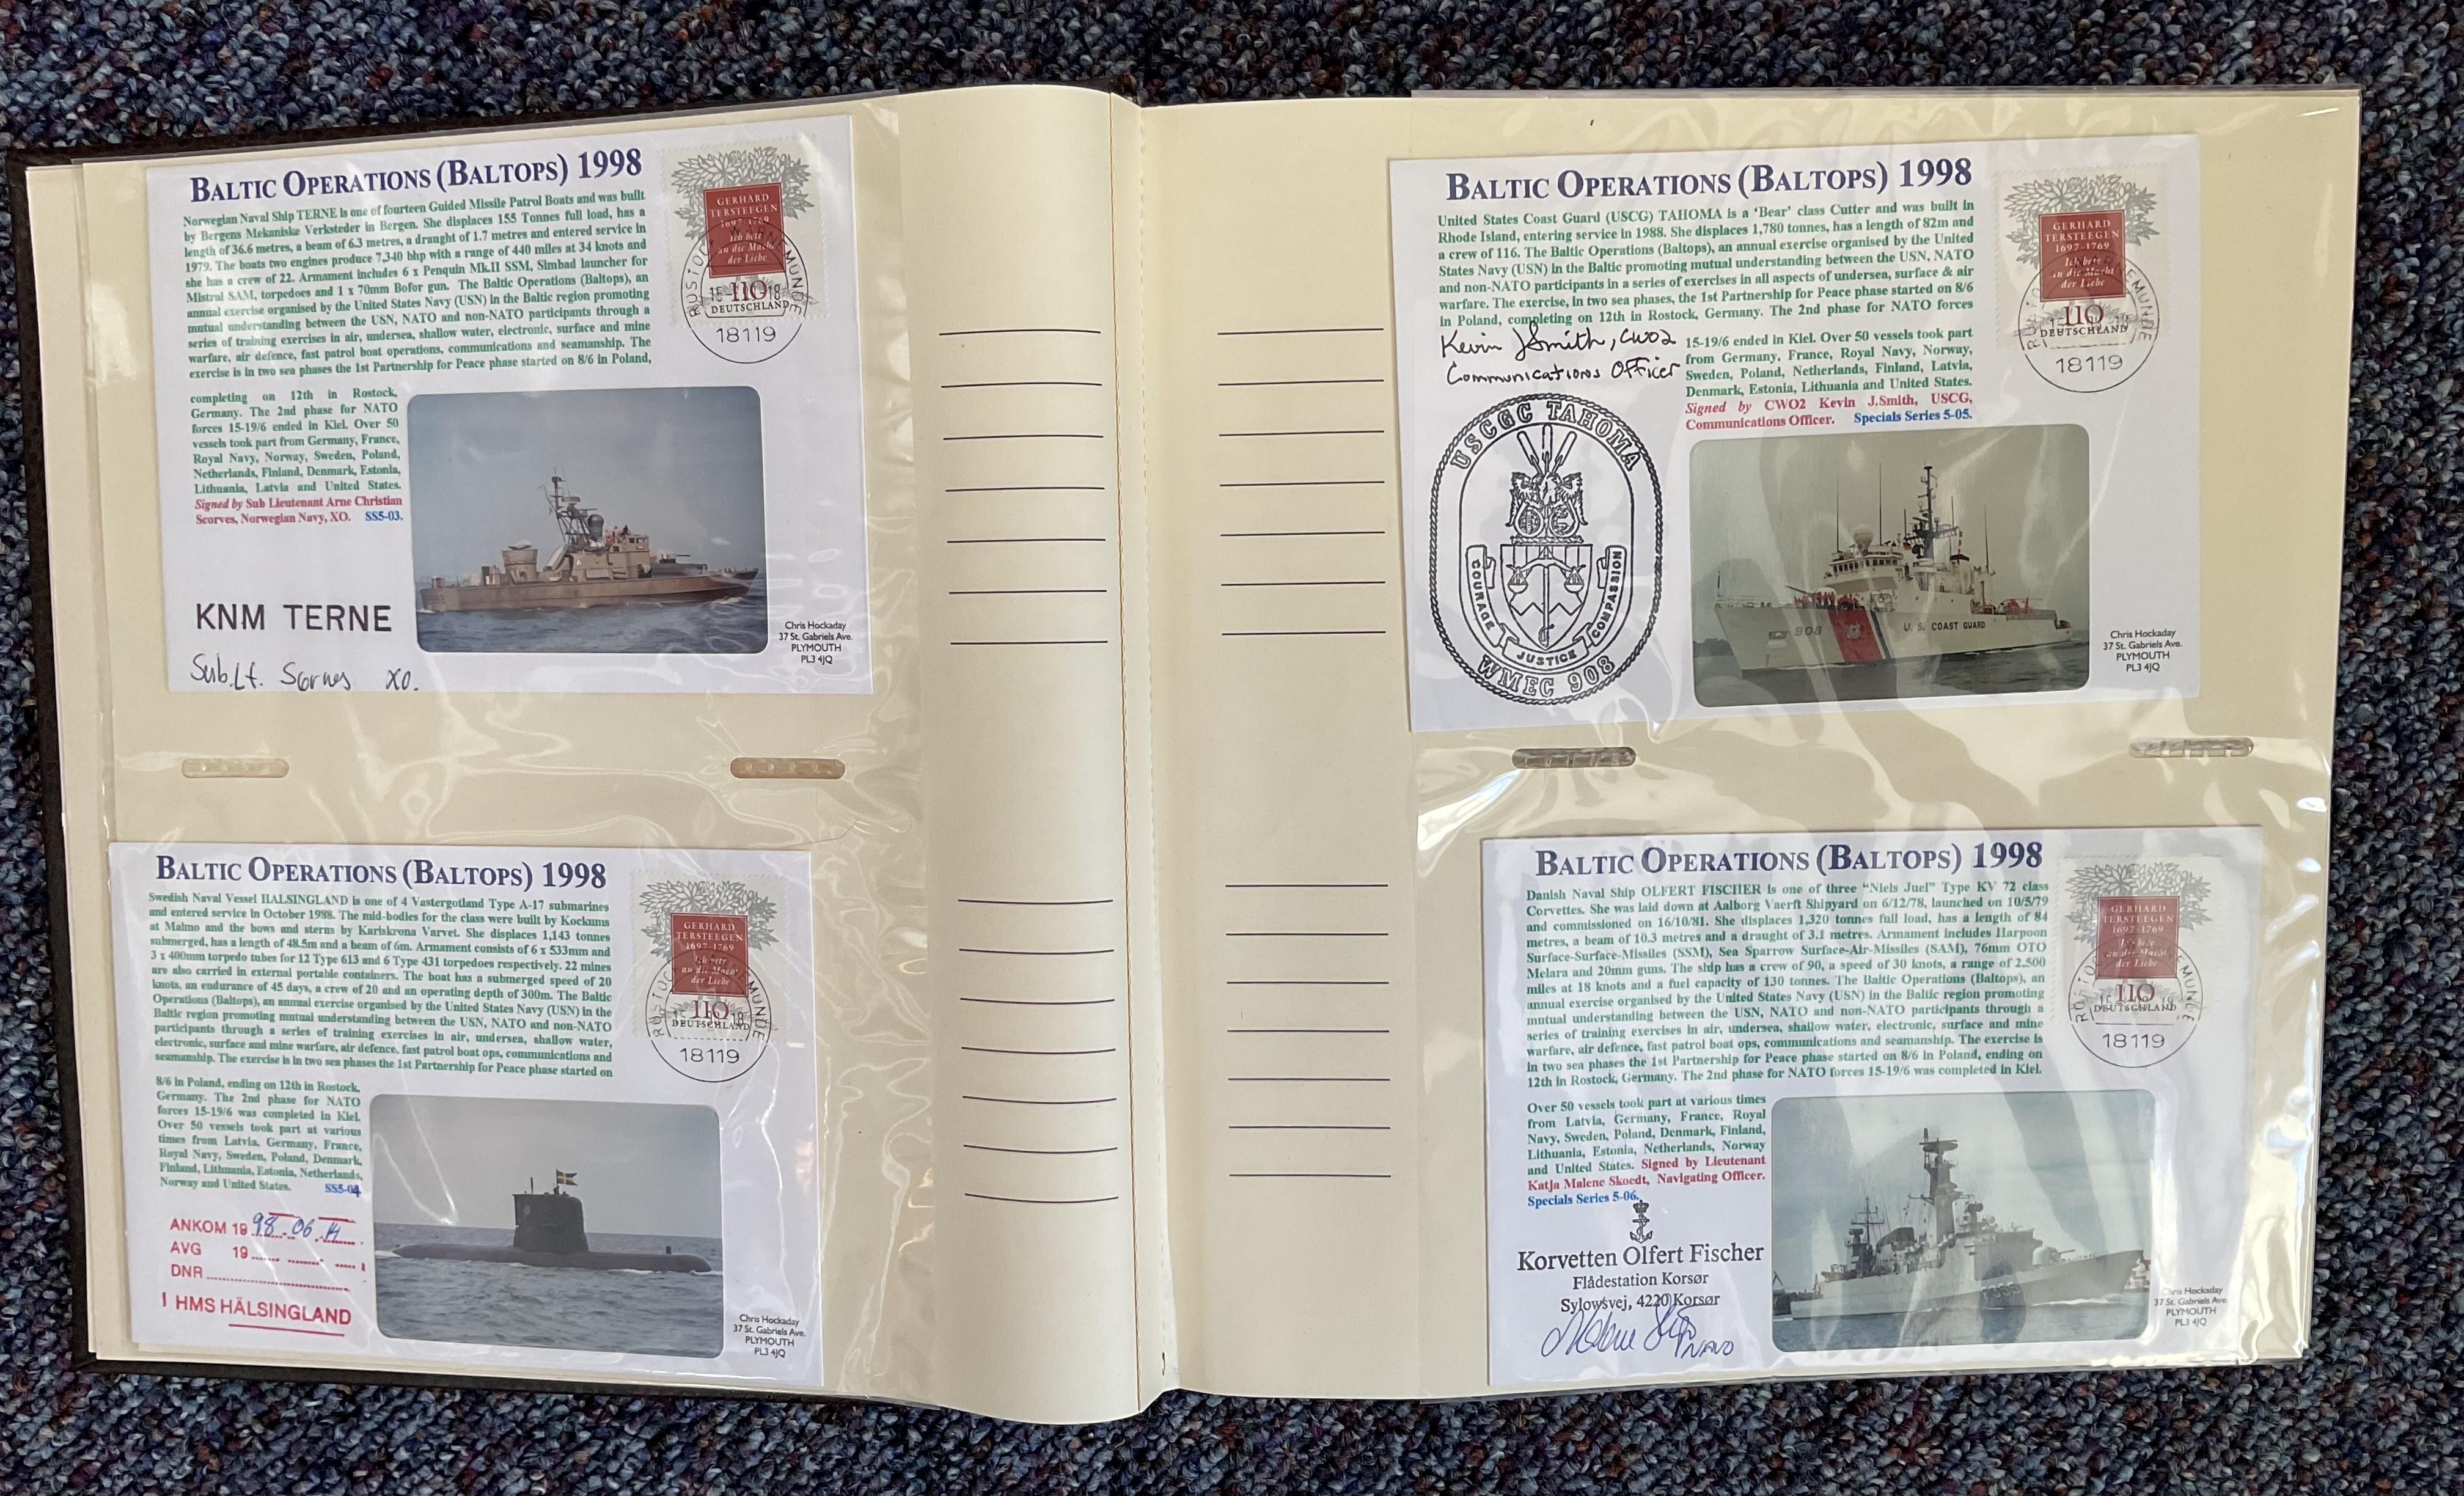 Fantastic Naval Collection of 95 Signed First Day Covers. Housed in a Lovely Photograph Album.